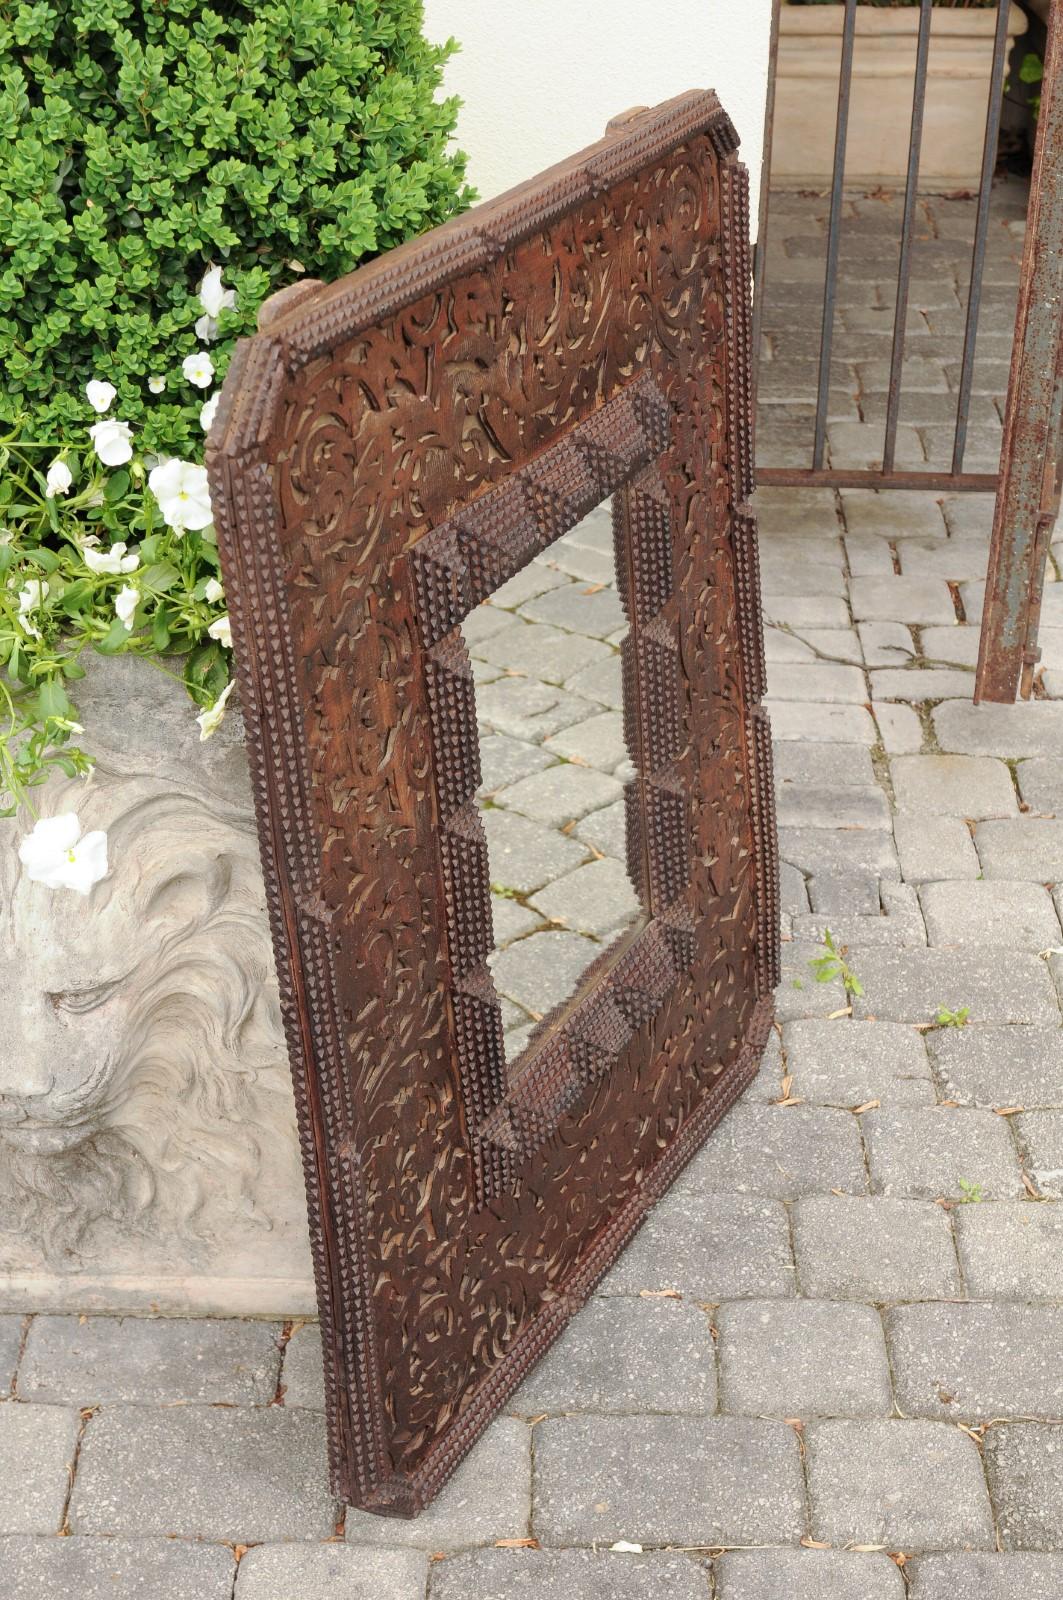 French Tramp Art Brown Wood Mirror with Scrollwork Design and Textured Accents 2